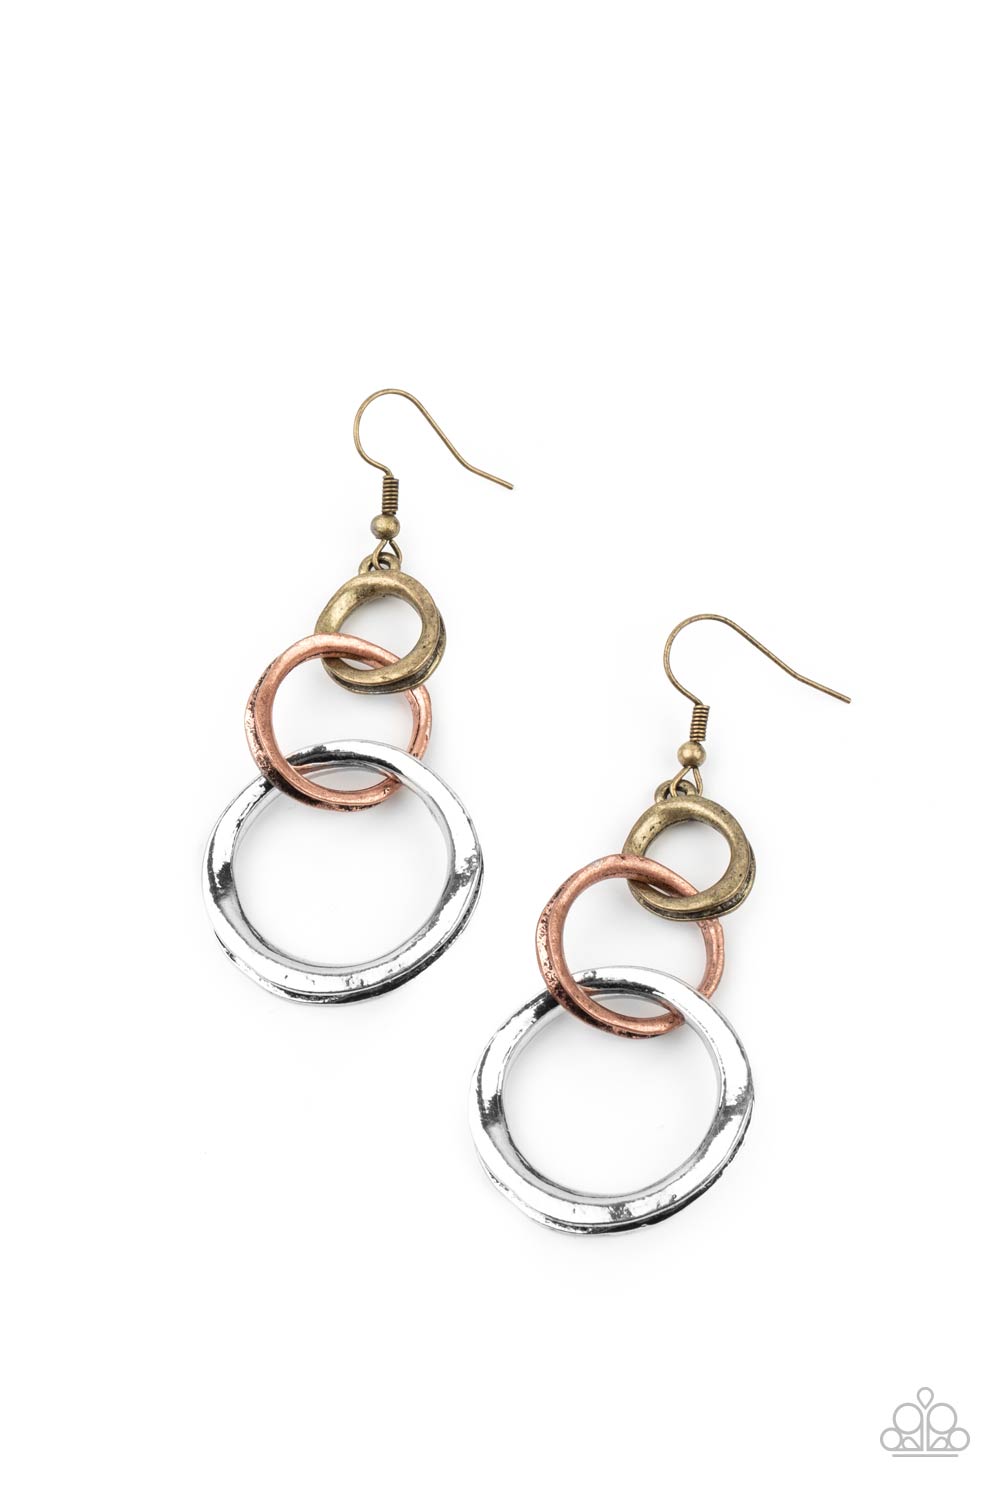 Harmoniously Handcrafted - Multi Brass, Copper & Silver Earrings - Princess Glam Shop